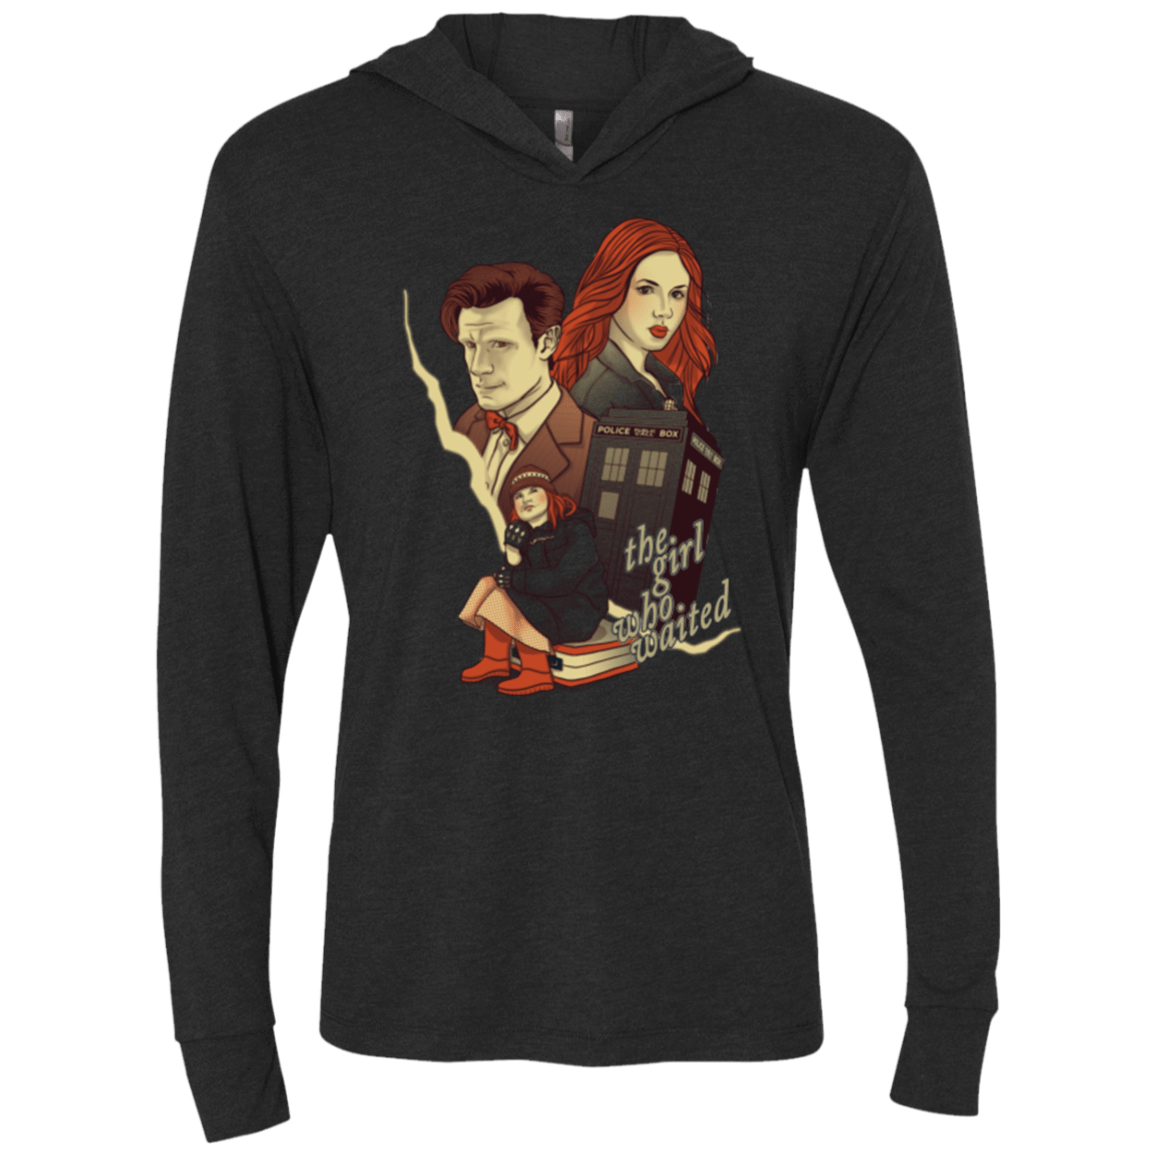 T-Shirts Vintage Black / X-Small The Girl who waited Triblend Long Sleeve Hoodie Tee